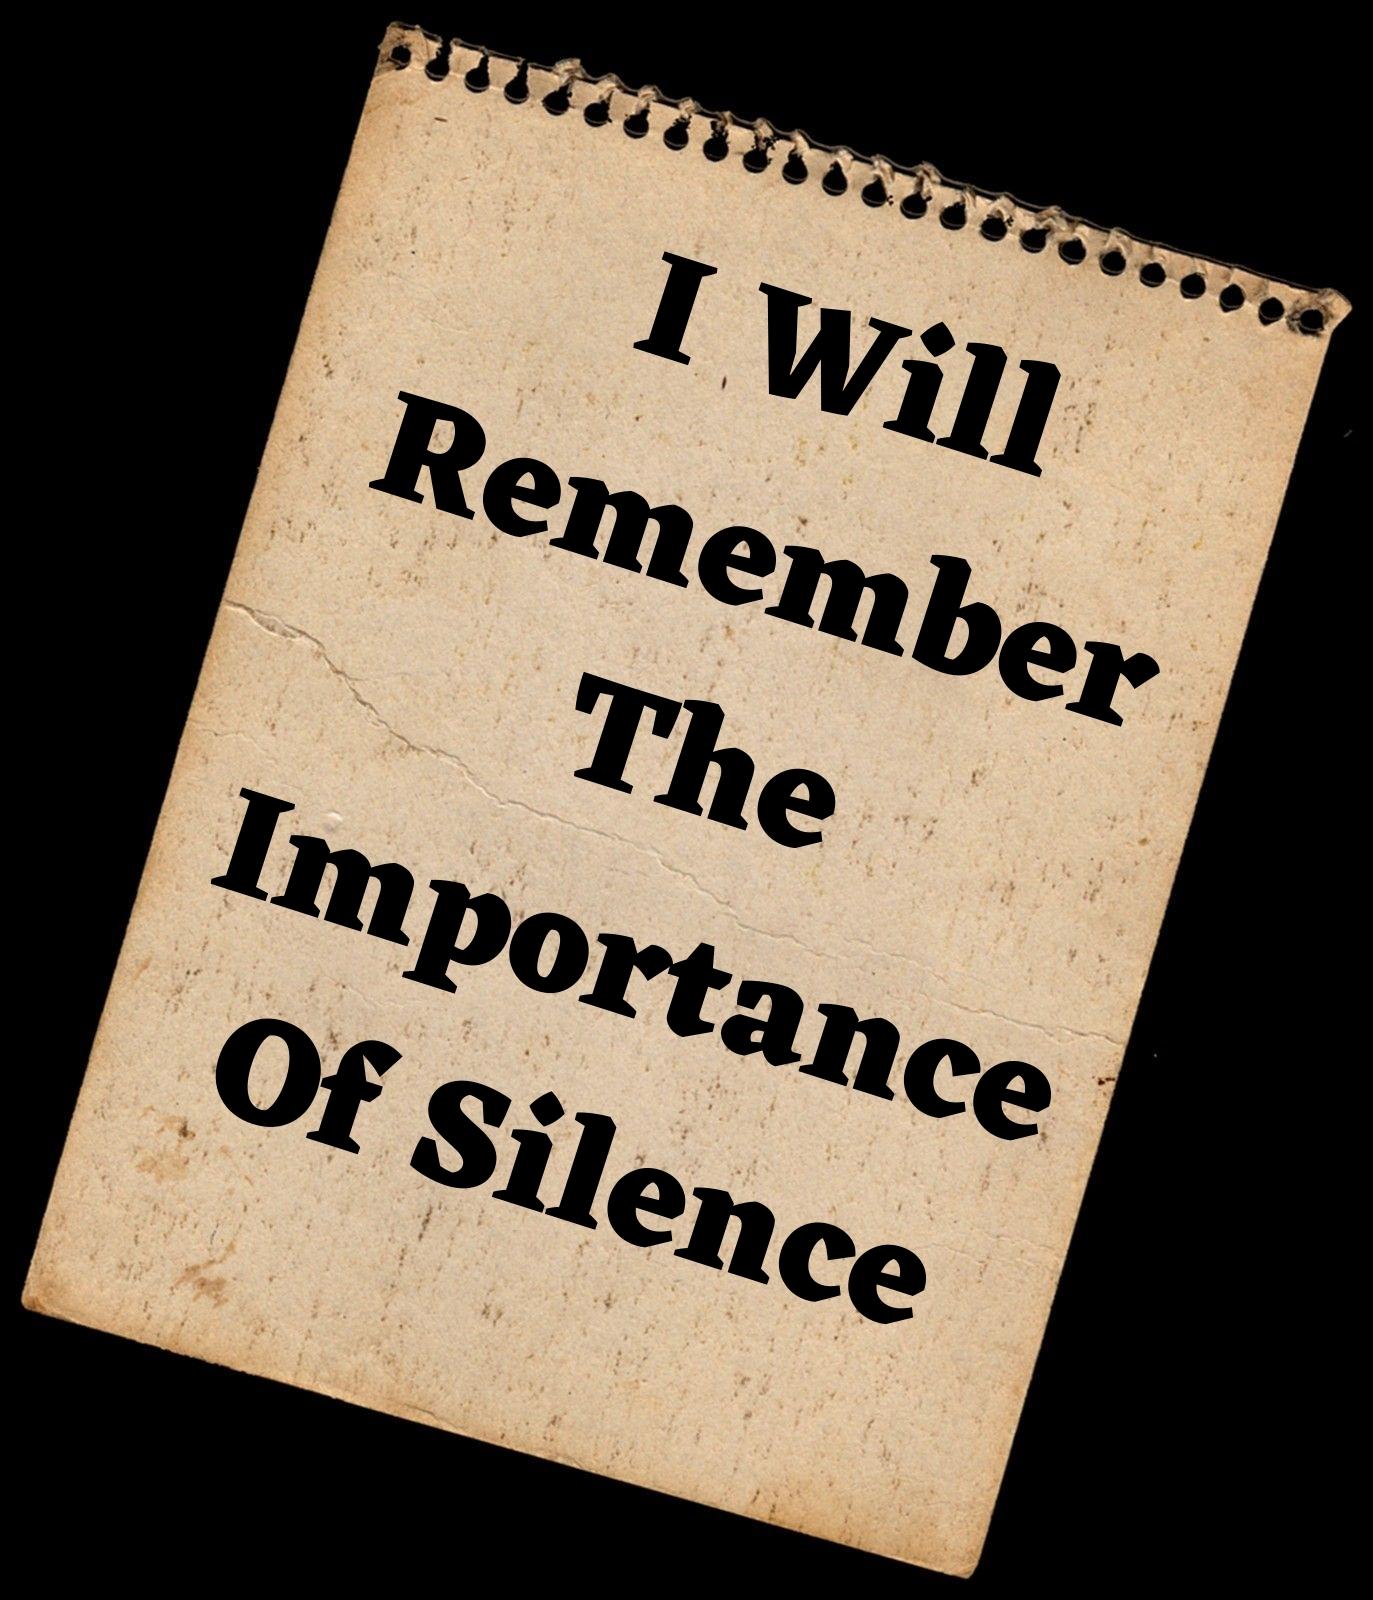  I will remember the importance of silence.